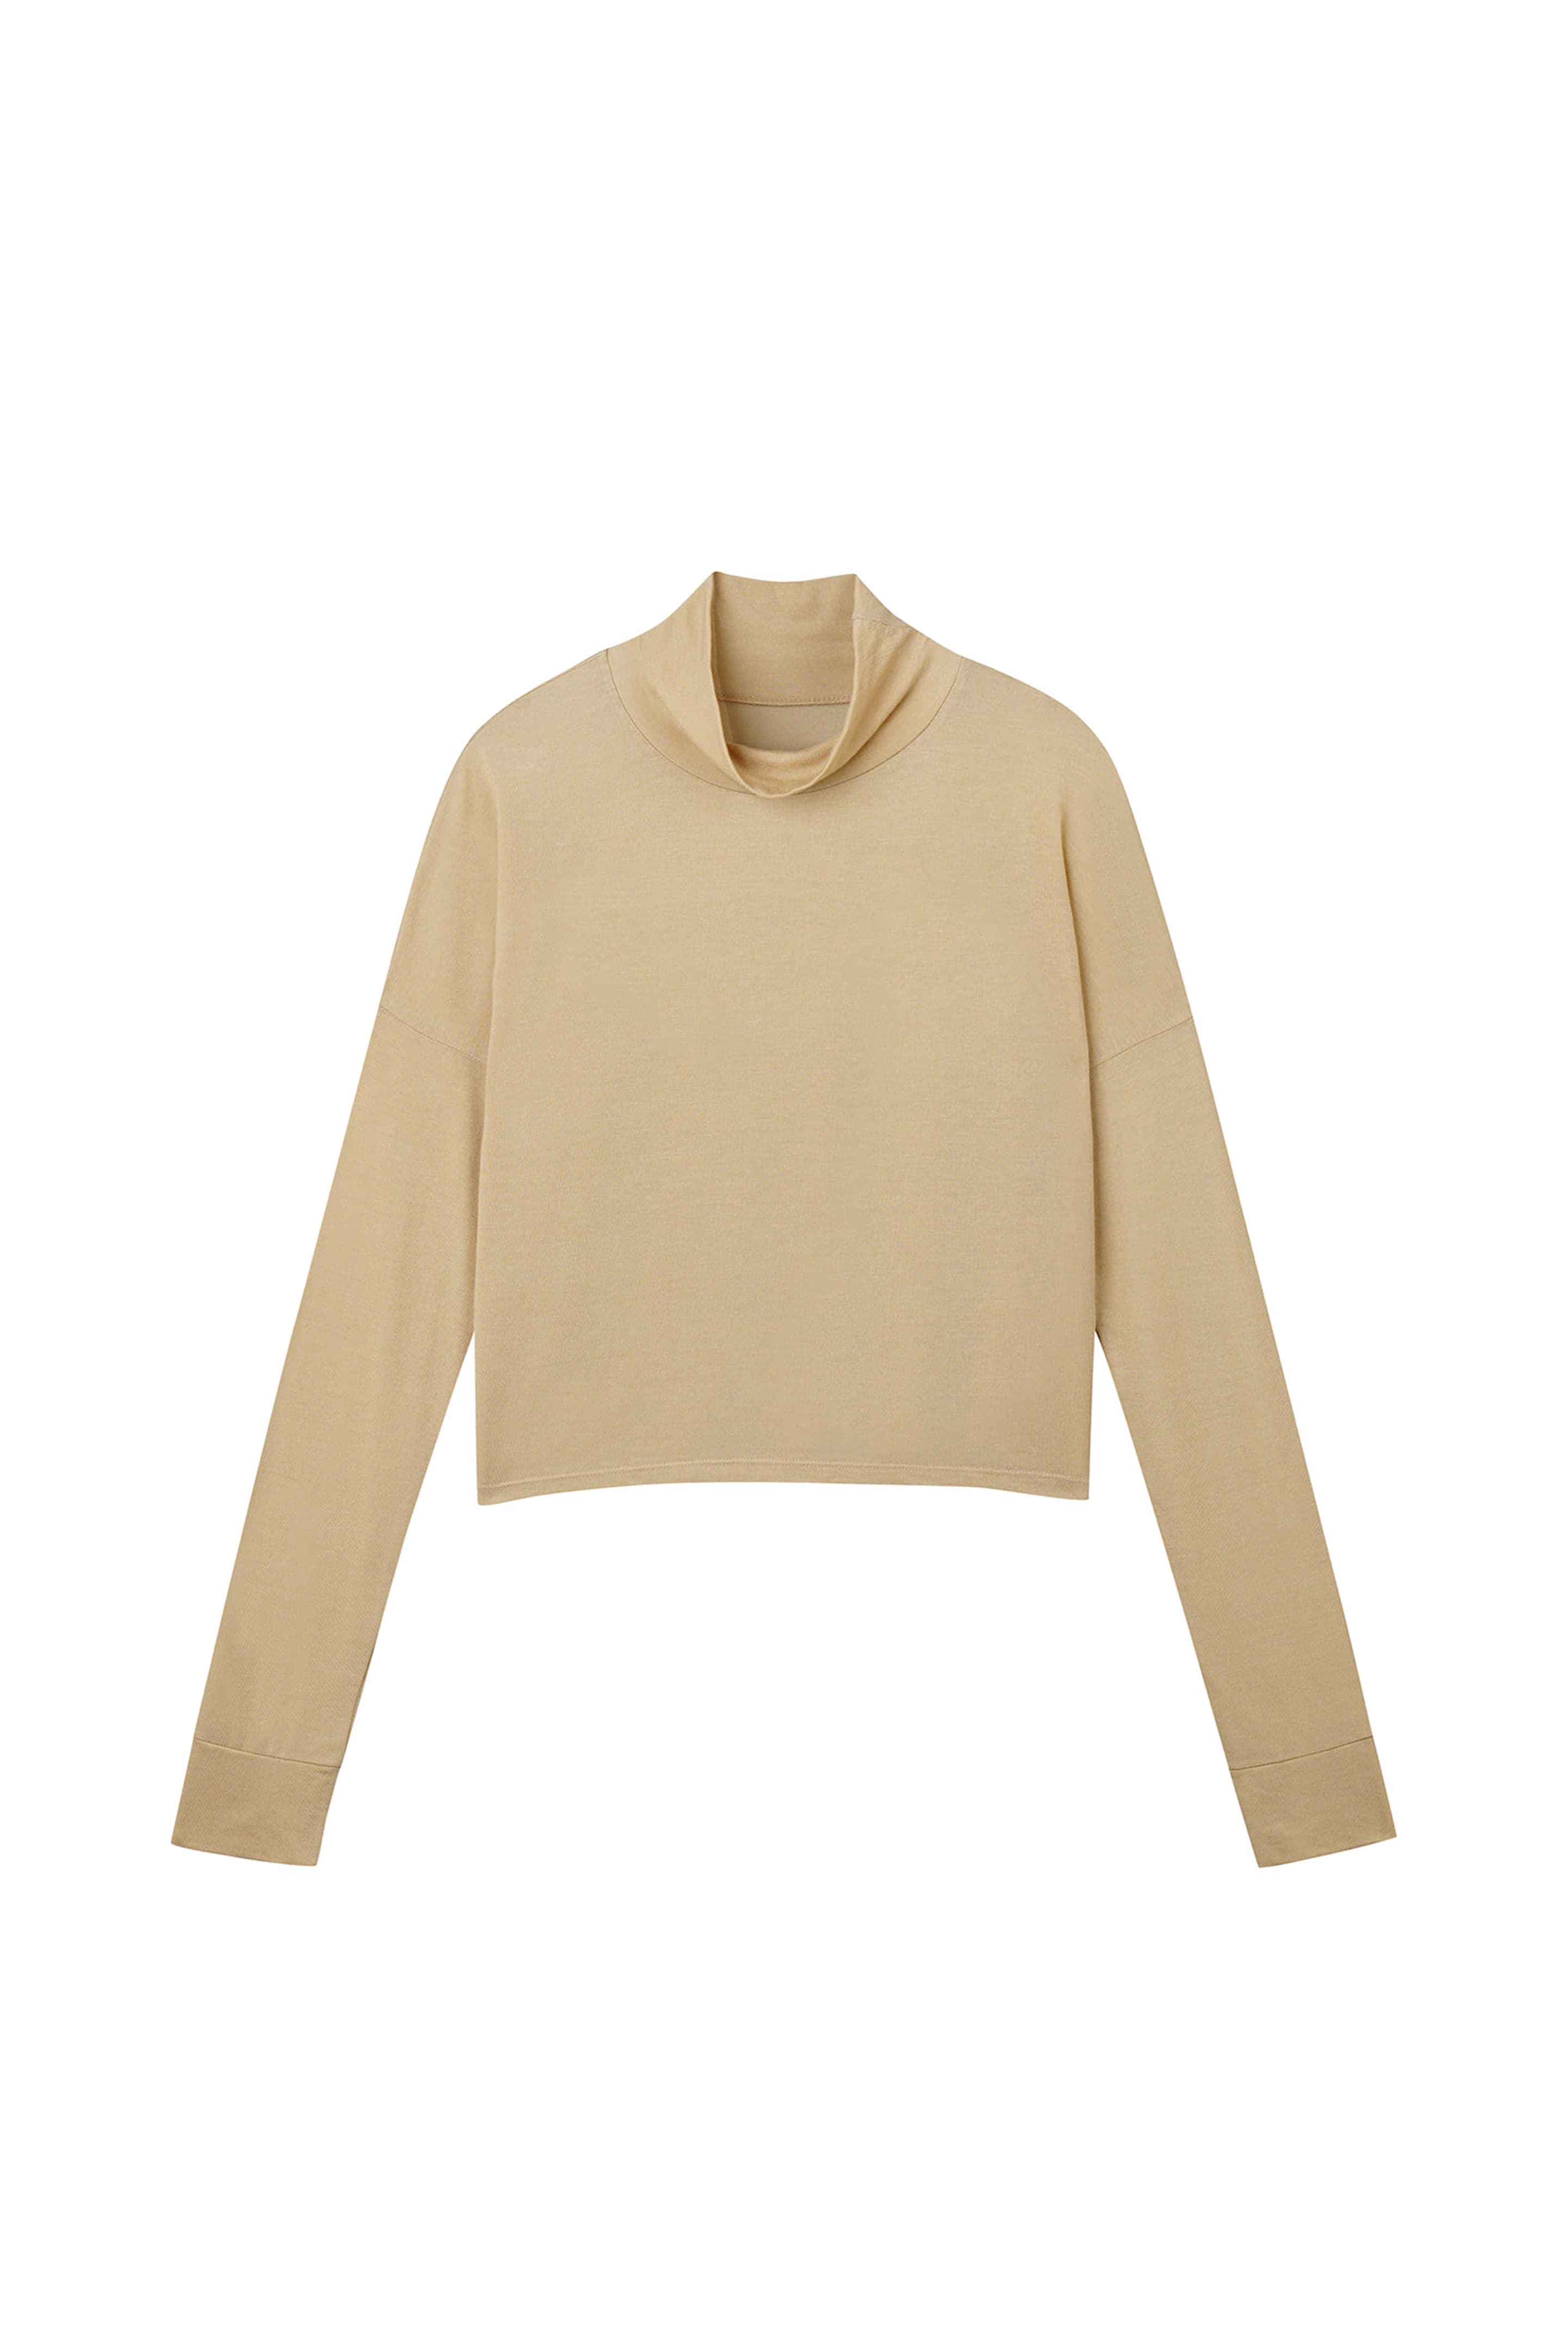 Jersey Half-Neck Cropped P/O Butter